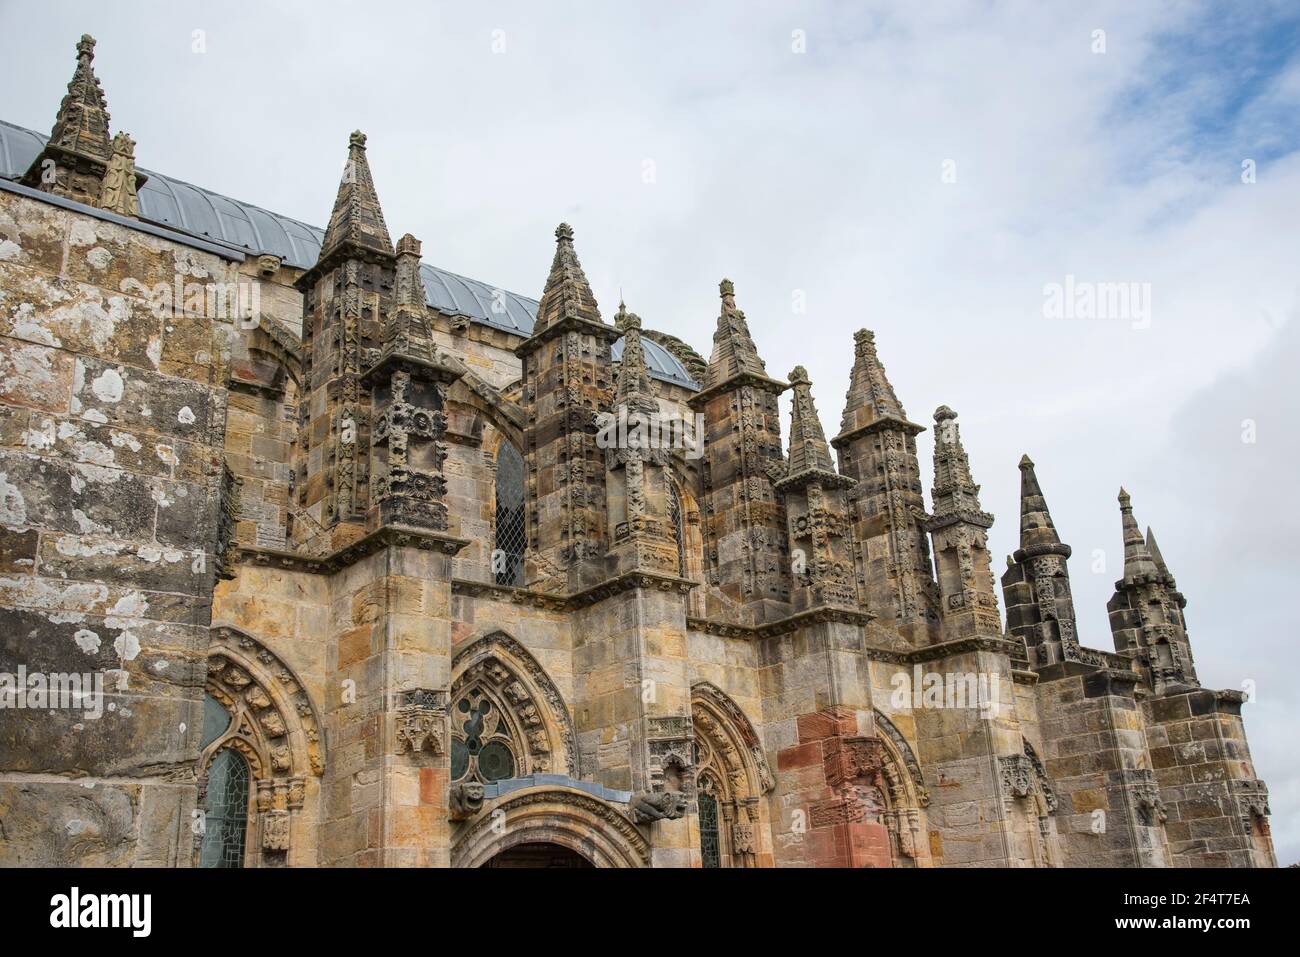 Some of the spiers of Rosslyn Chapel - Edinburgh Stock Photo